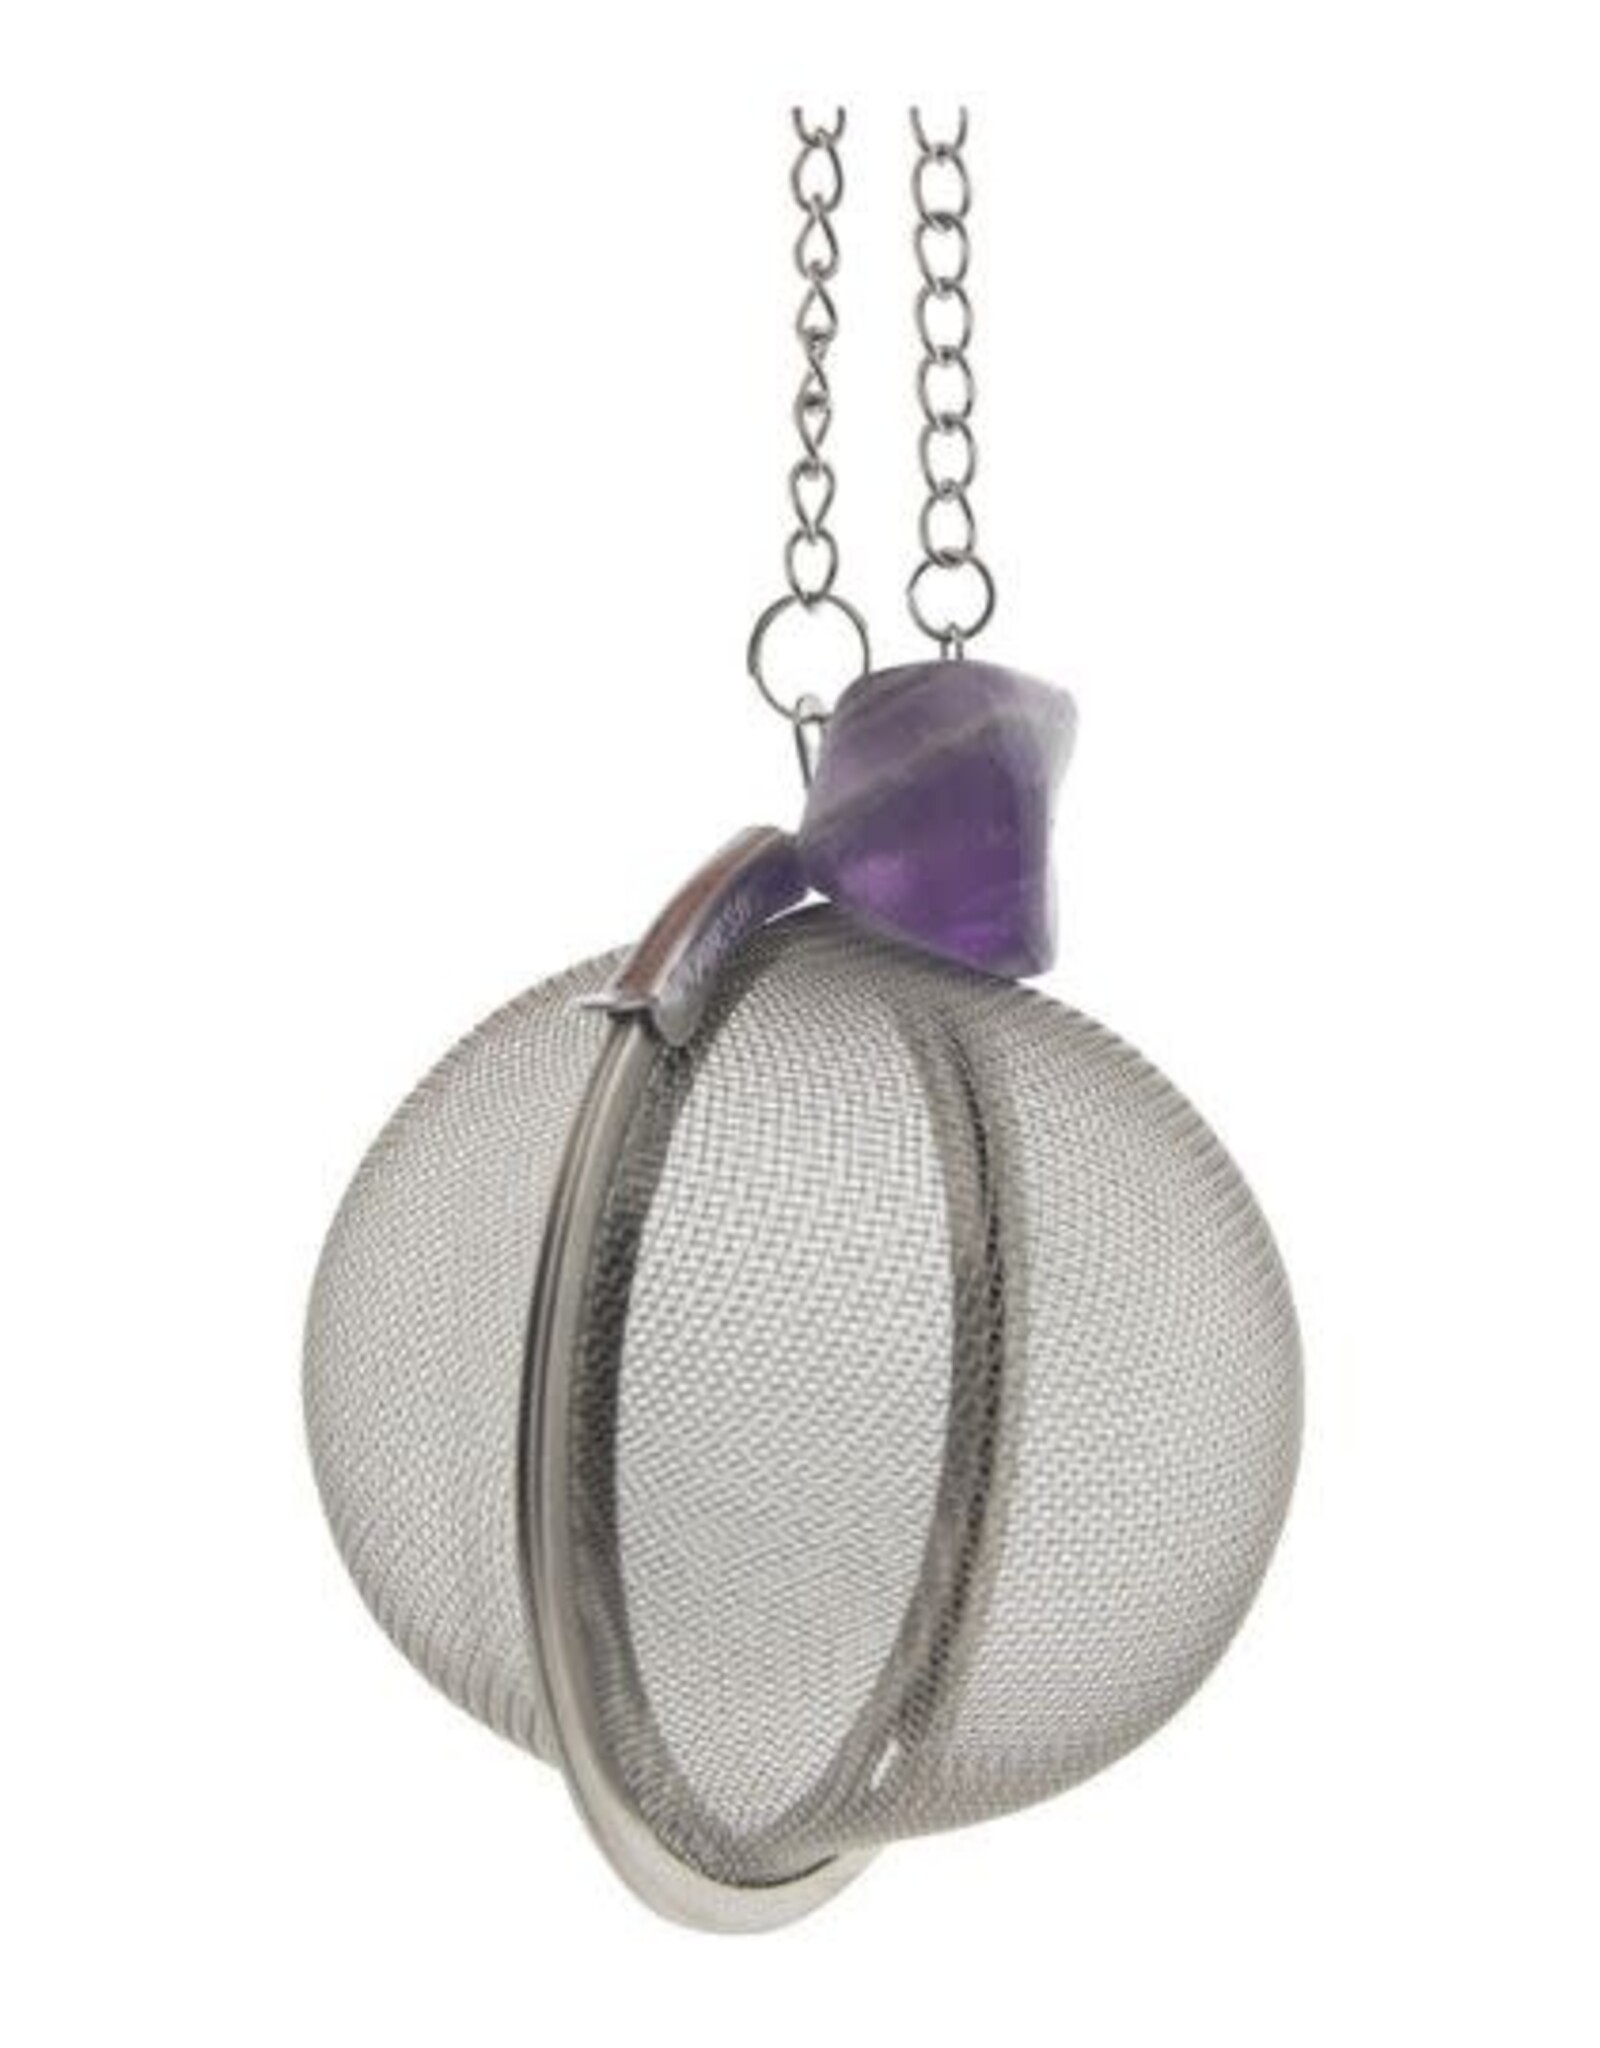 Tea Infuser Ball with Amethyst - Stainless Steel